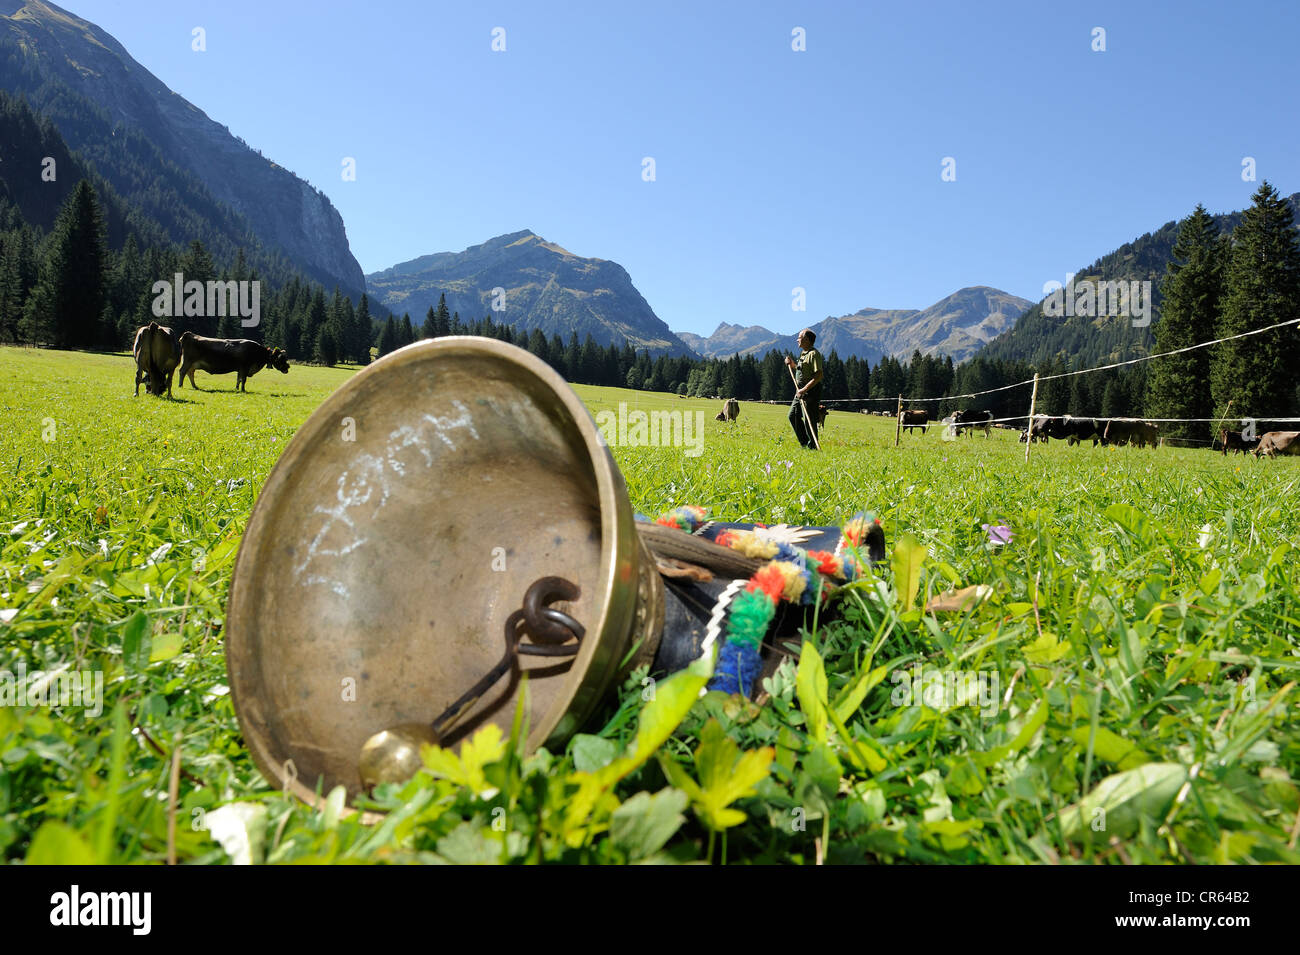 Cowbell to decorate the cows lying readily on a meadow, Almabtrieb, where the cattle are led back from their alpine pasture Stock Photo